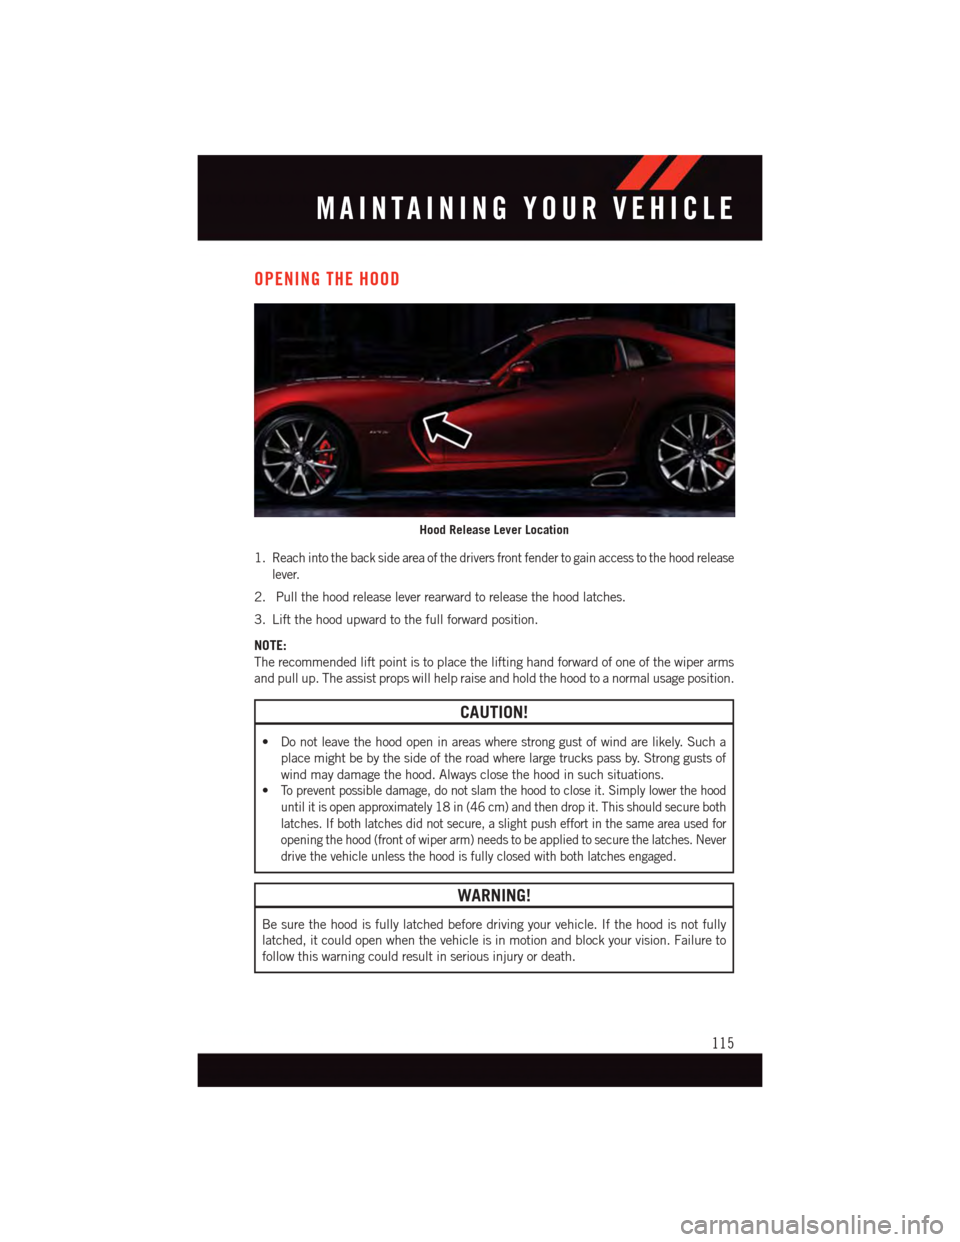 DODGE VIPER 2015 VX / 3.G Owners Manual OPENING THE HOOD
1.Reach into the back side area of the drivers front fender to gain access to the hood release
lever.
2. Pull the hood release lever rearward to release the hood latches.
3. Lift the 